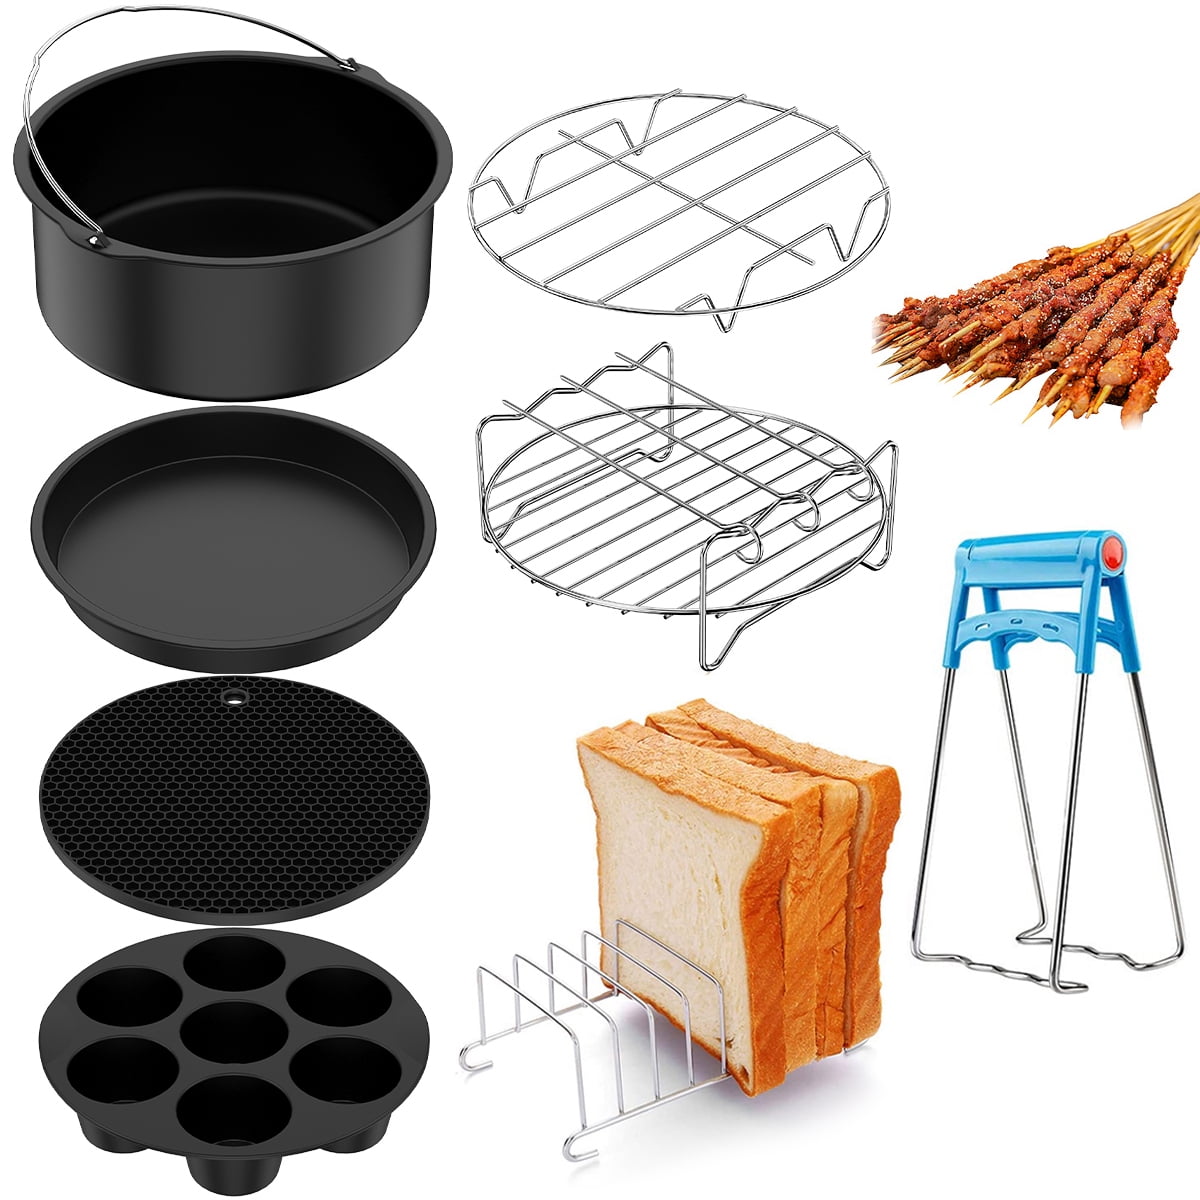 Retrok 7Pcs Air Fryer Accessories Set with 7 Non-stick Air Fryer Pot  Stainless Steel Air Fryer Pizza Pan Steamer Rack Skewer Rack Oil Brush Tong  Silicone Mat for Baking Cooking 3.5L-4.3L Air